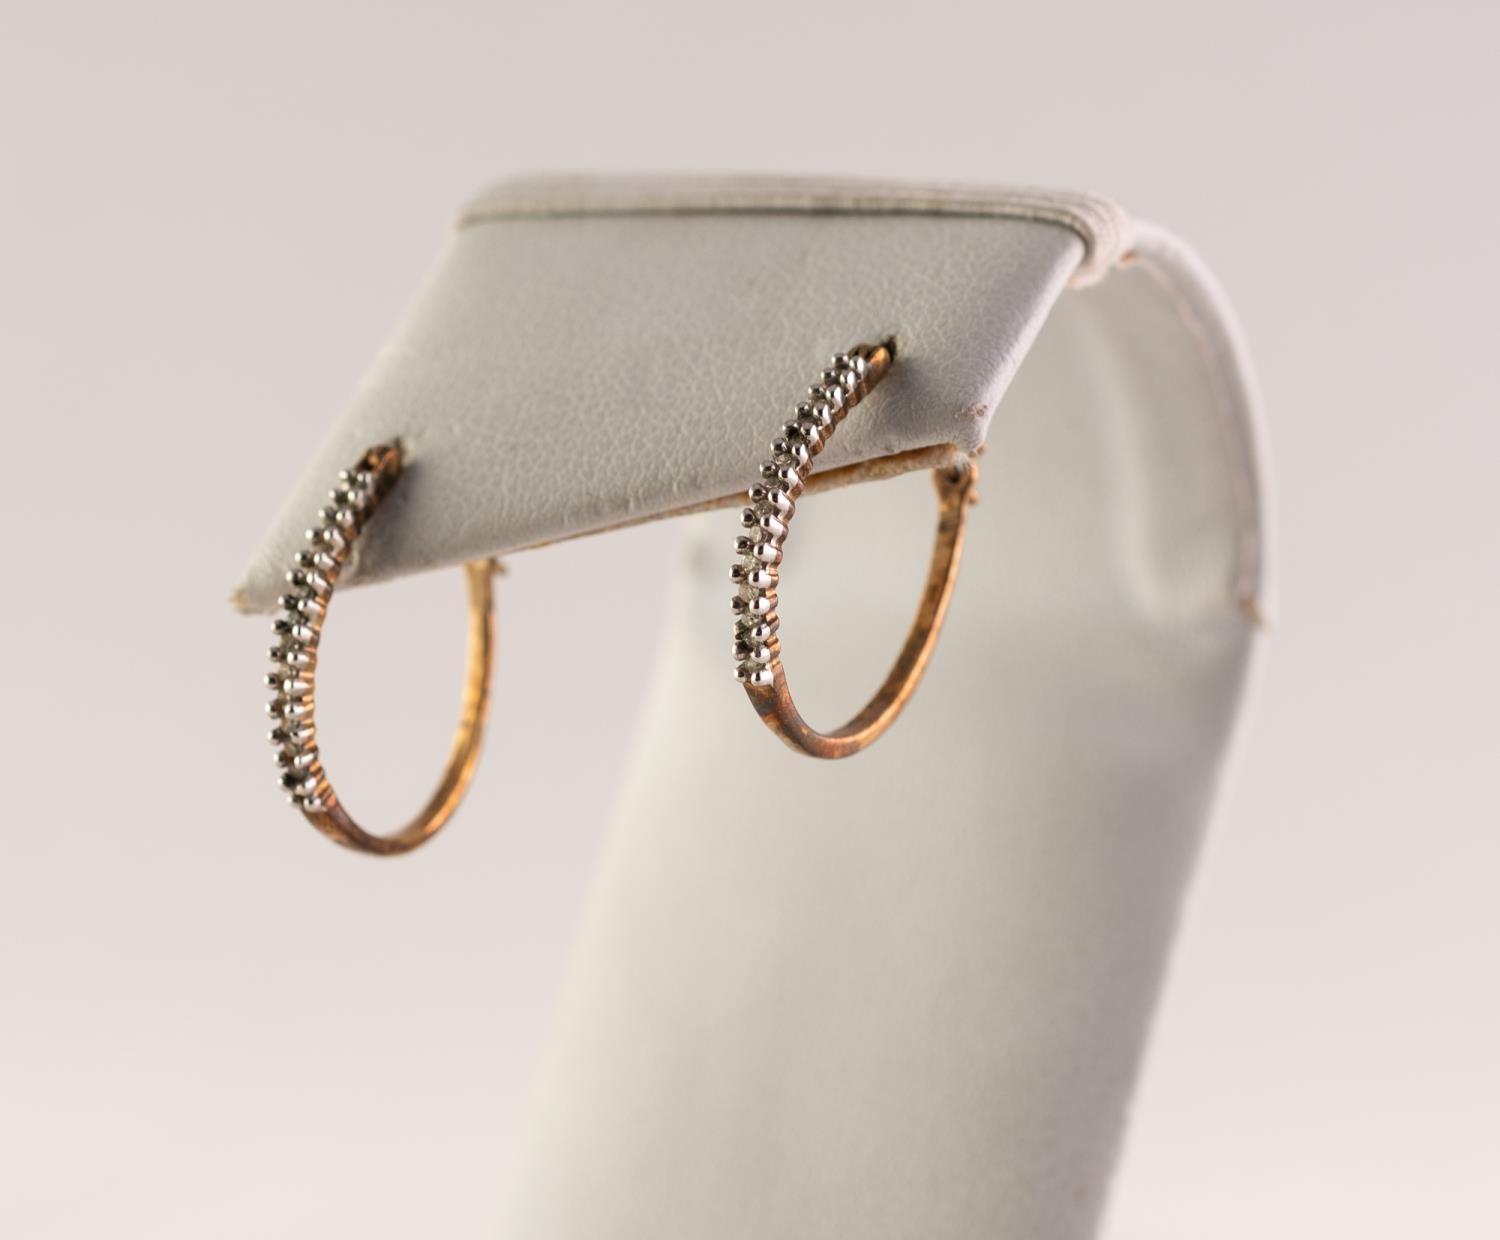 PAIR OF 9ct GOLD HORSESHOE SHAPED HOOP EARRINGS, the front of each set with fourteen tiny